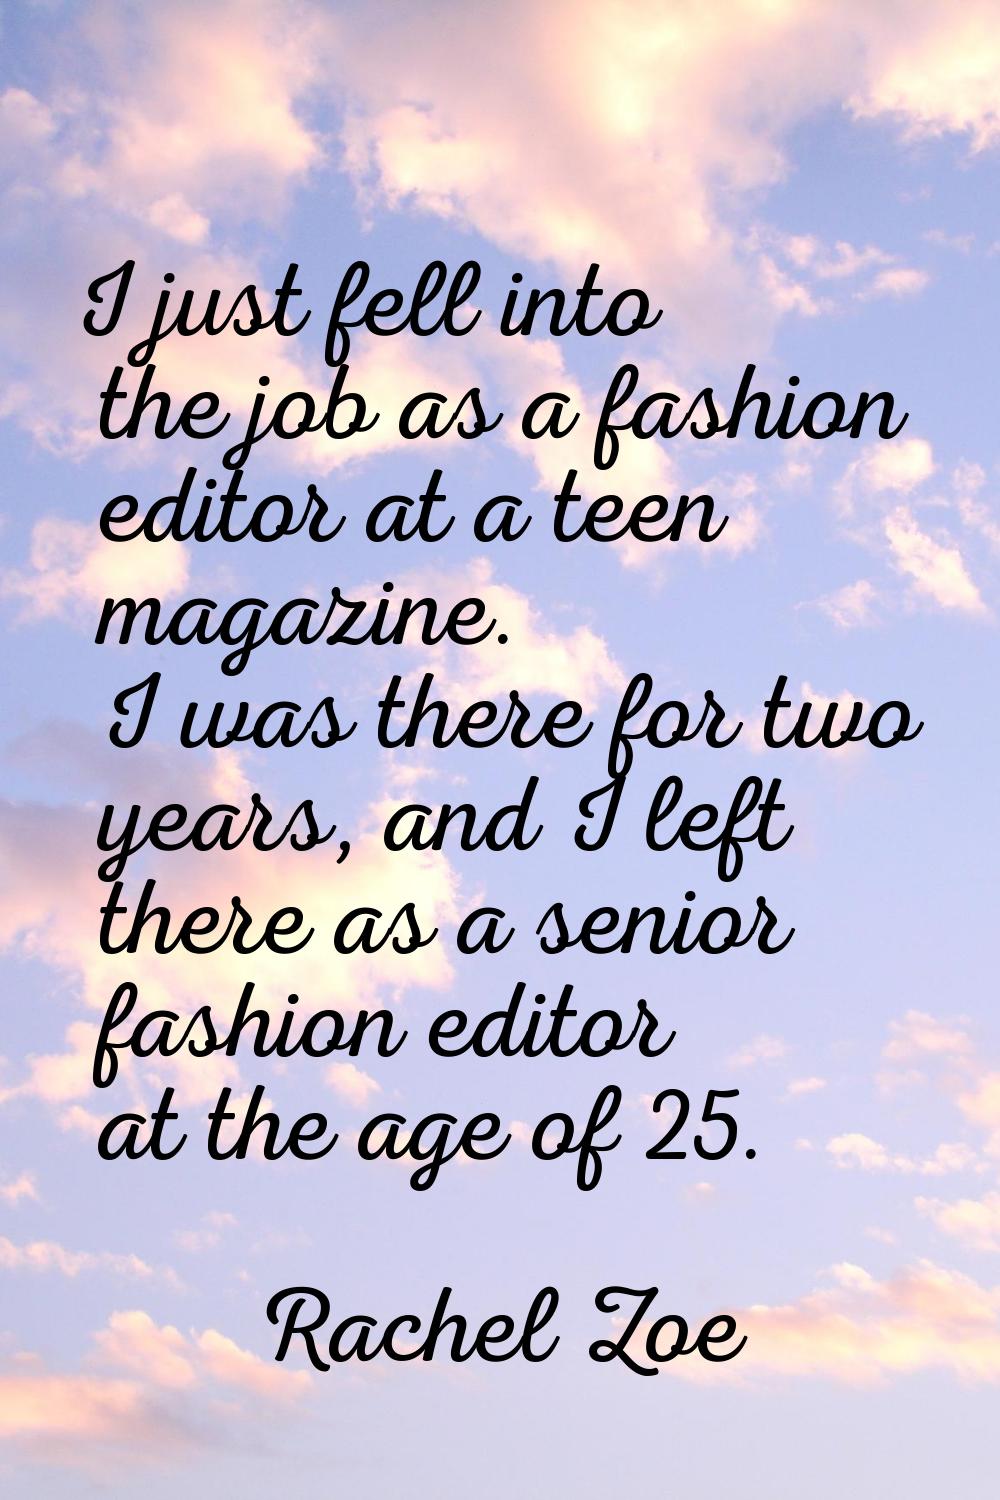 I just fell into the job as a fashion editor at a teen magazine. I was there for two years, and I l